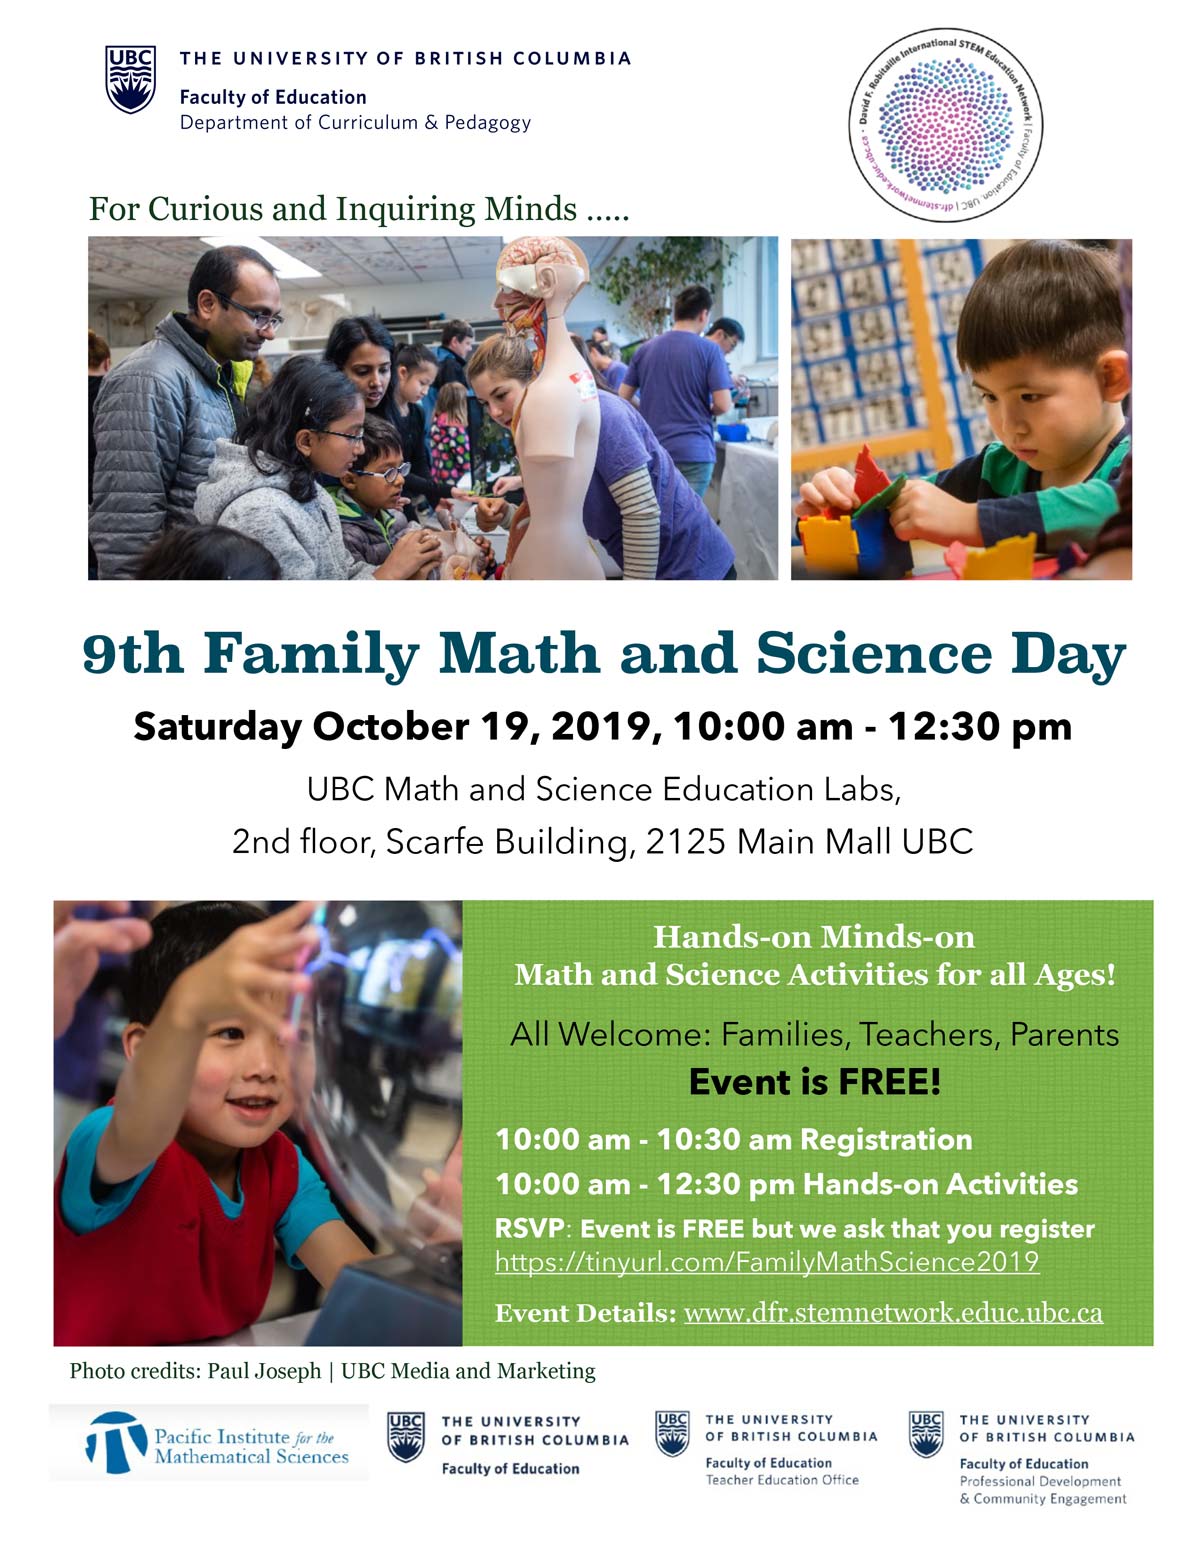 Family Math and Science Day 2019